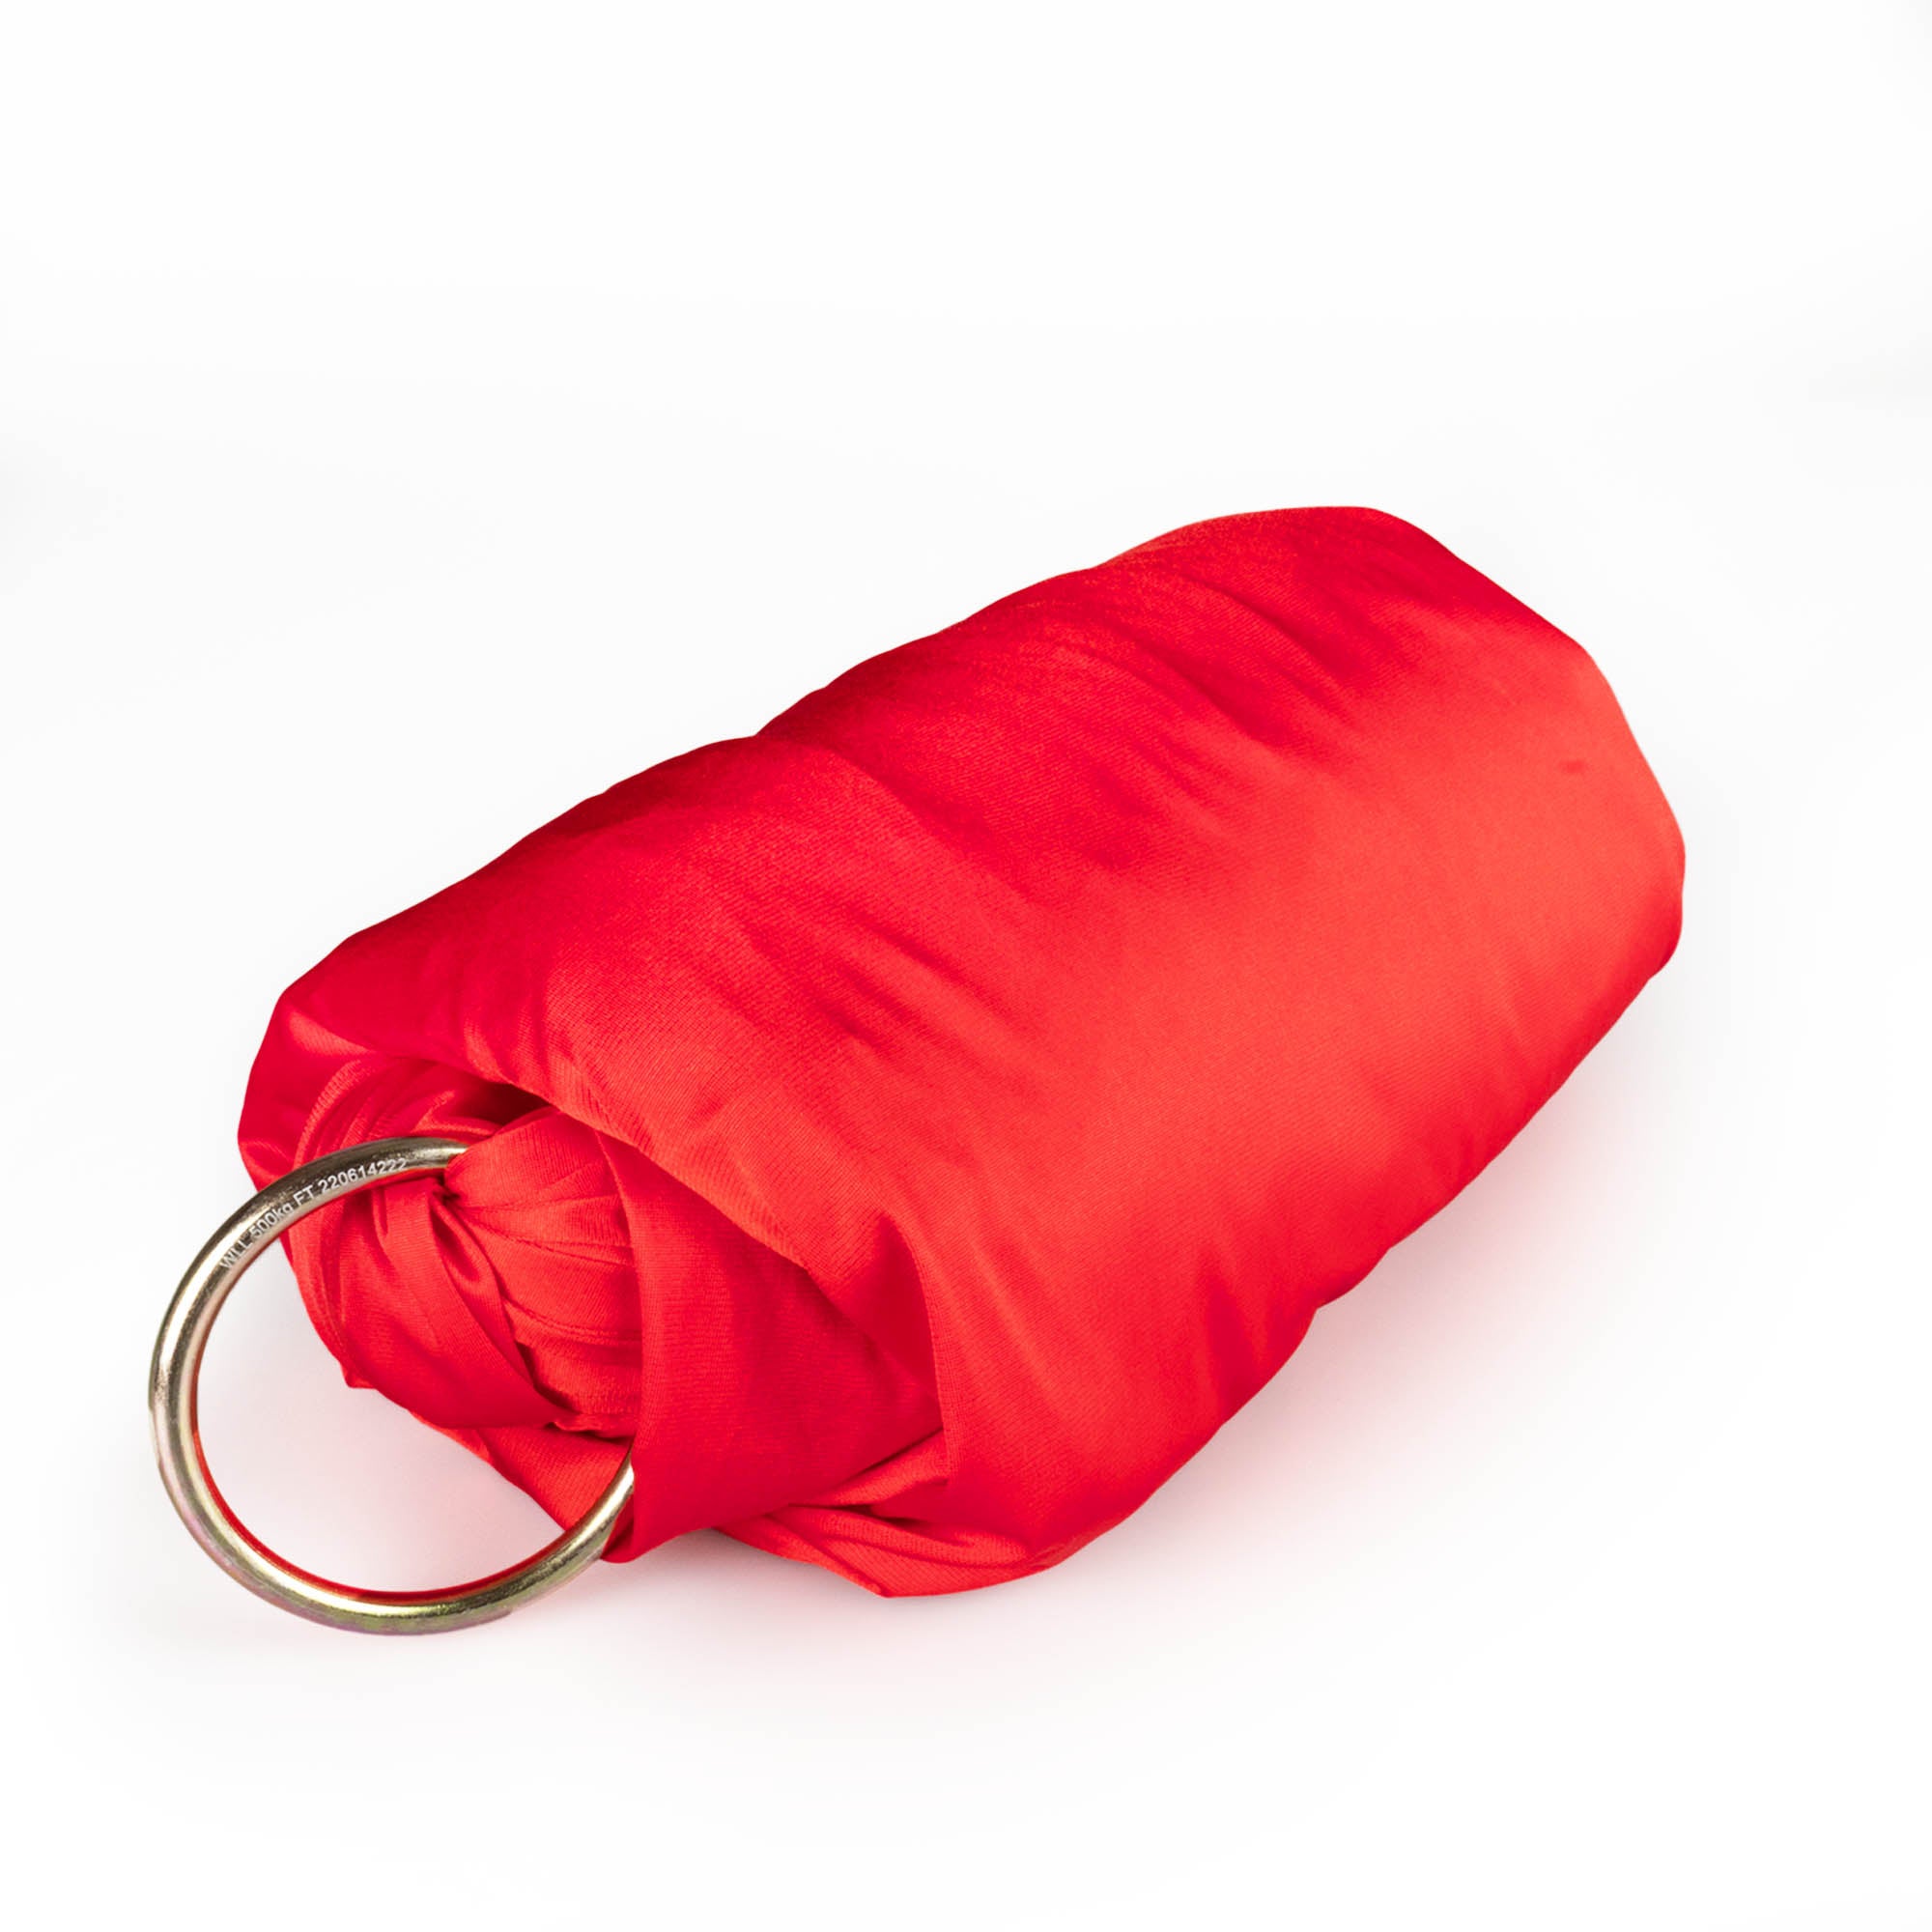 Red yoga hammock rolled up with ring attached